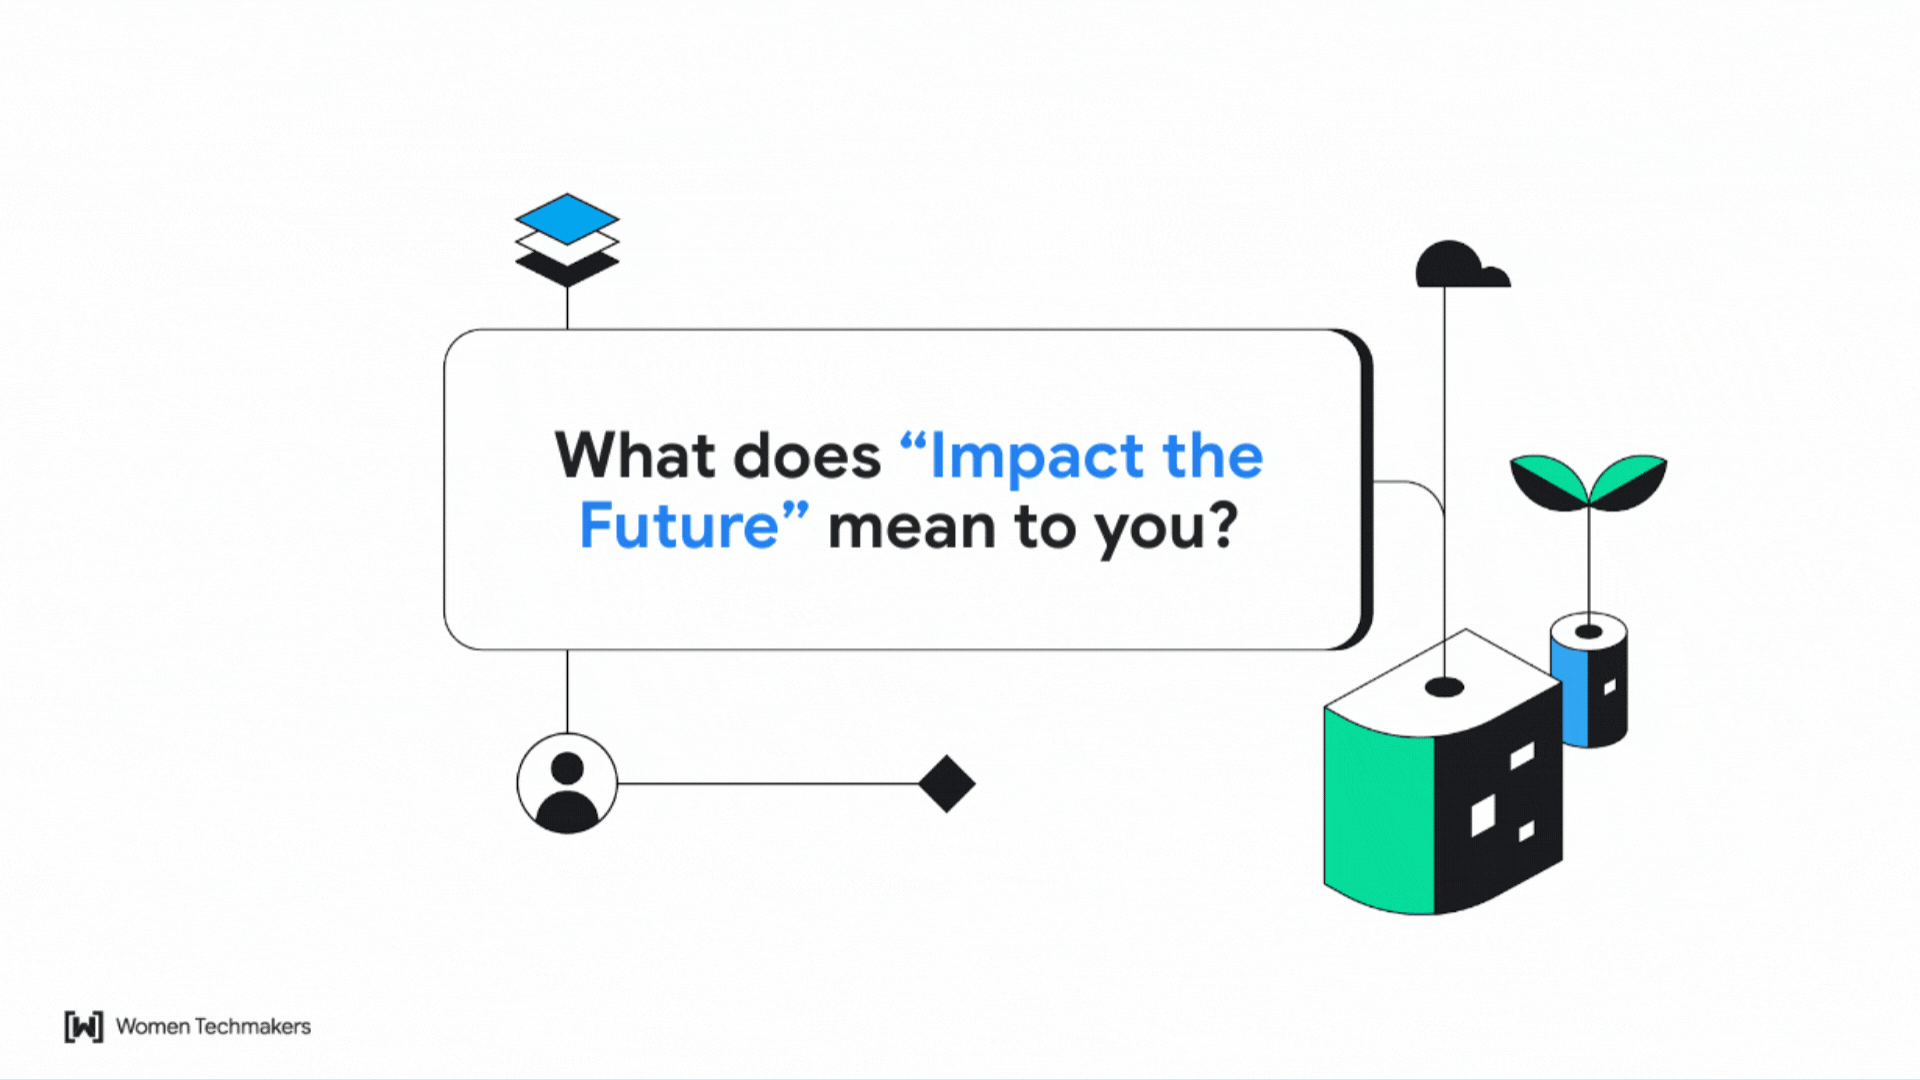 Animated quotes from Women Techmakers members on the theme 'Impact the Future.' Members share their thoughts and inspirations on how to shape a better tomorrow through technology.